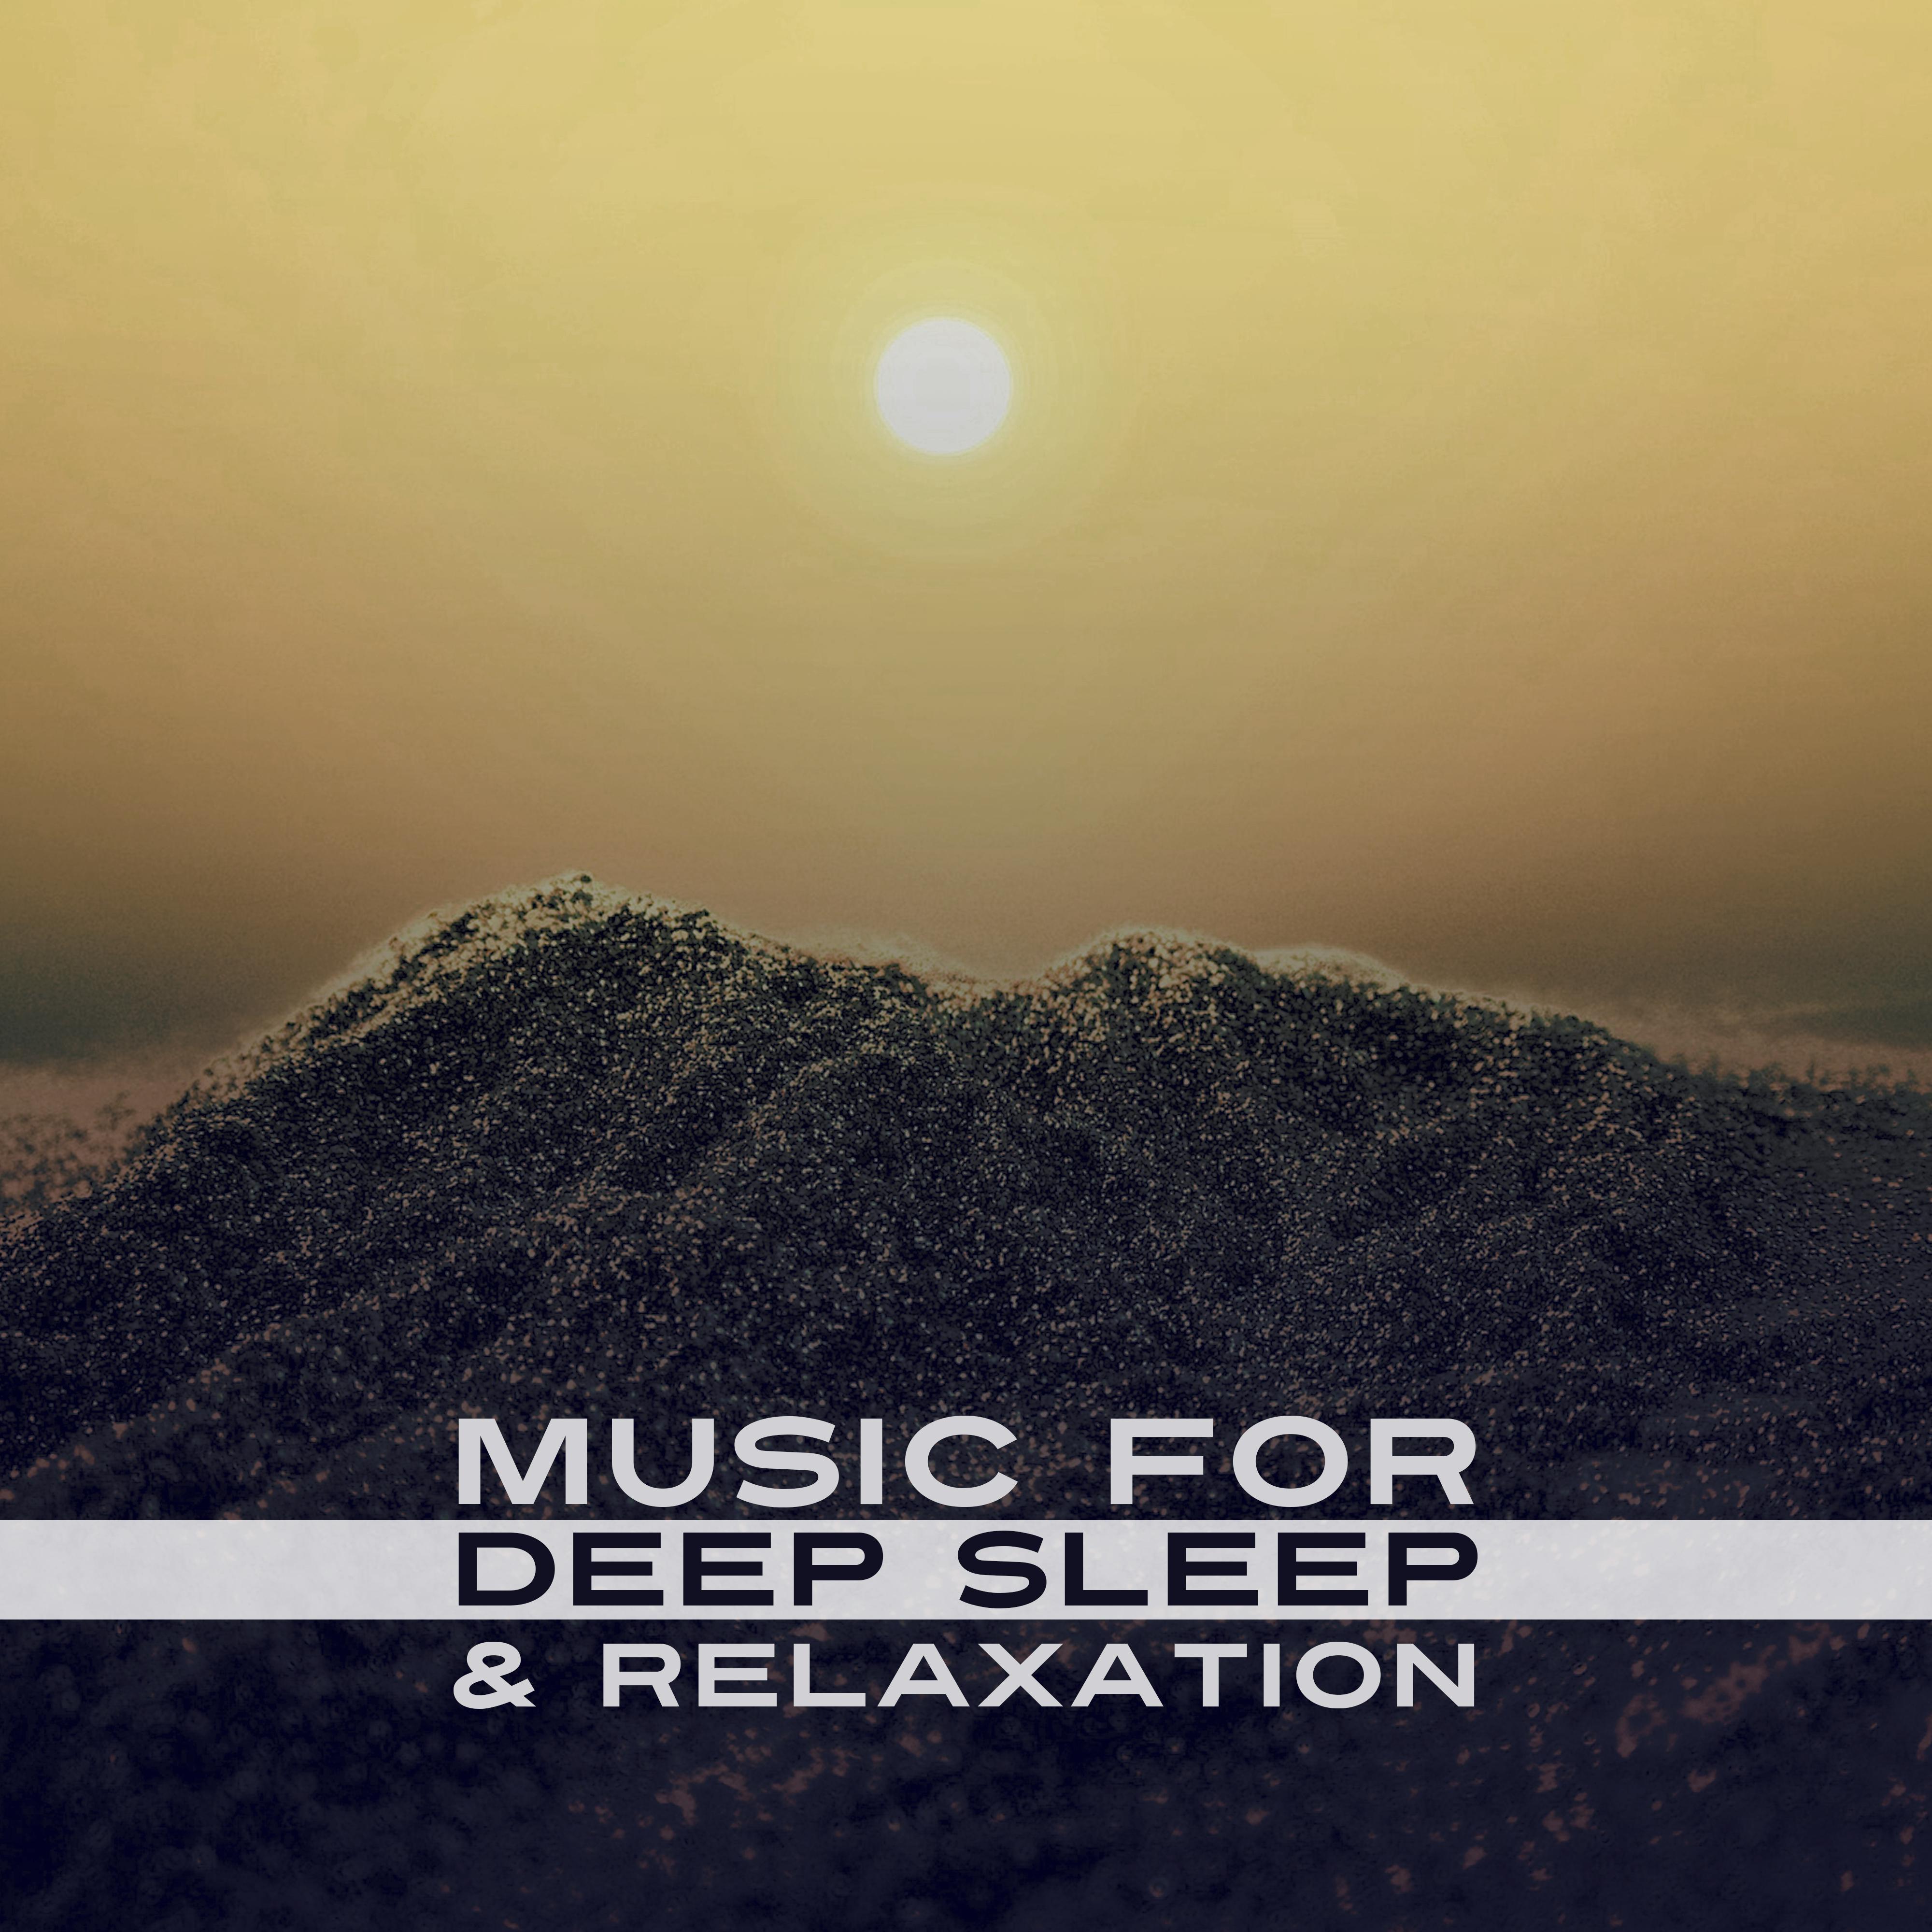 Music for Deep Sleep & Relaxation – Calming Waves, Soothing Sounds, Easy Listening, New Age Sounds, Music to Relax